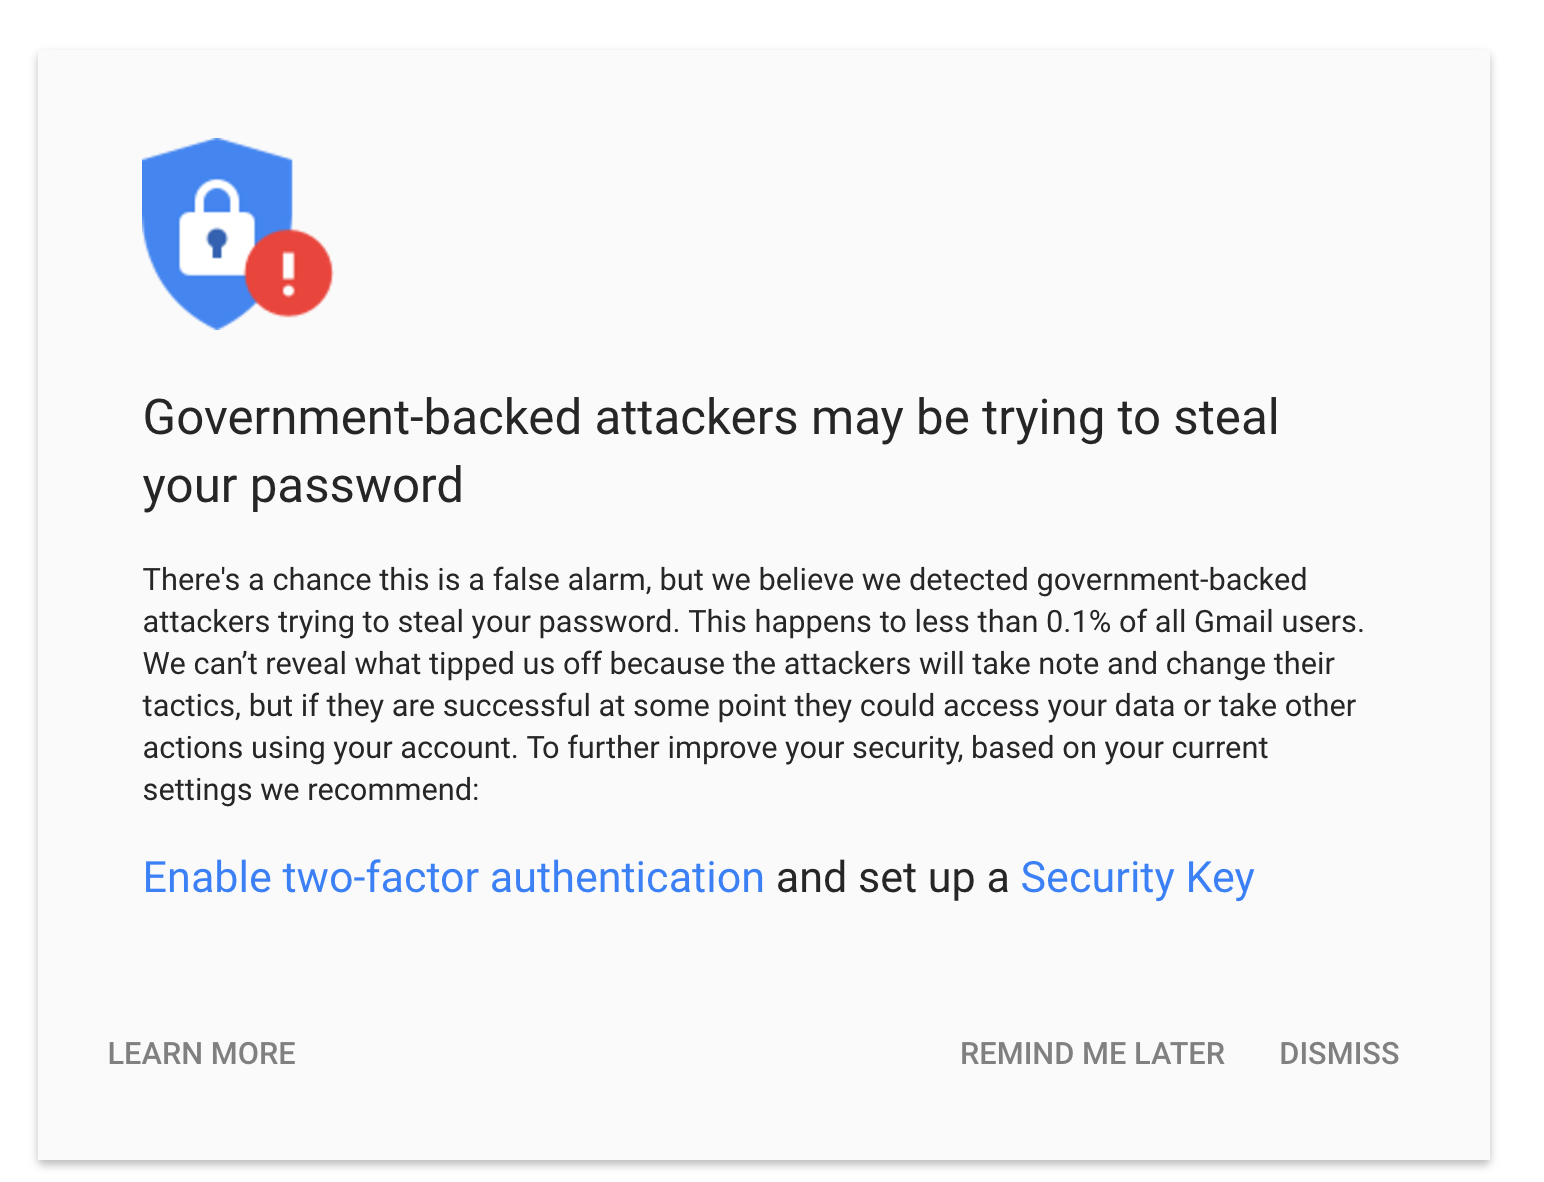 Google accounts are being targeted by government-backed attackers